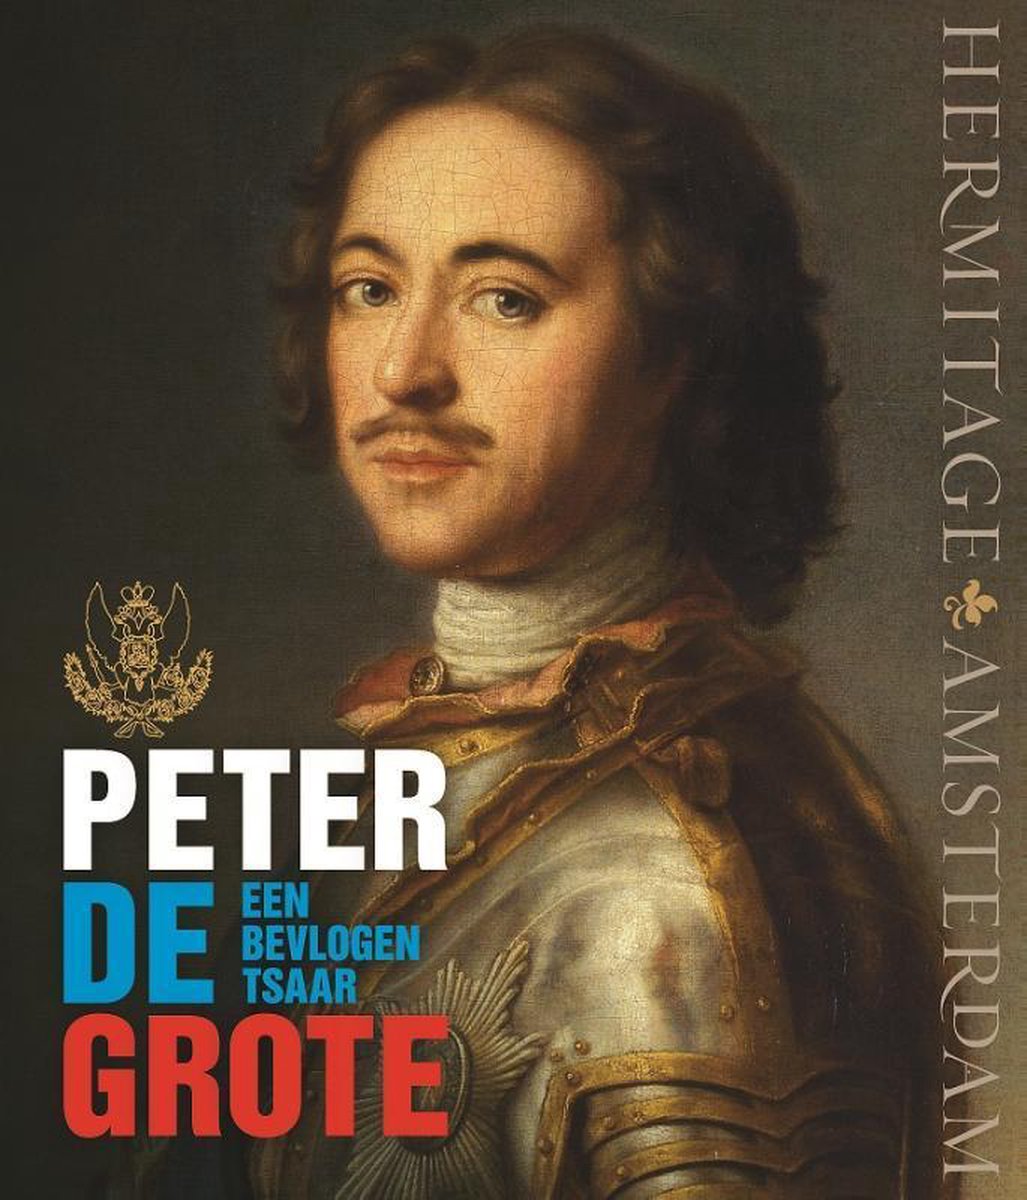 Peter the great s. Peter’s the Greatest. Peter the great short Biography.